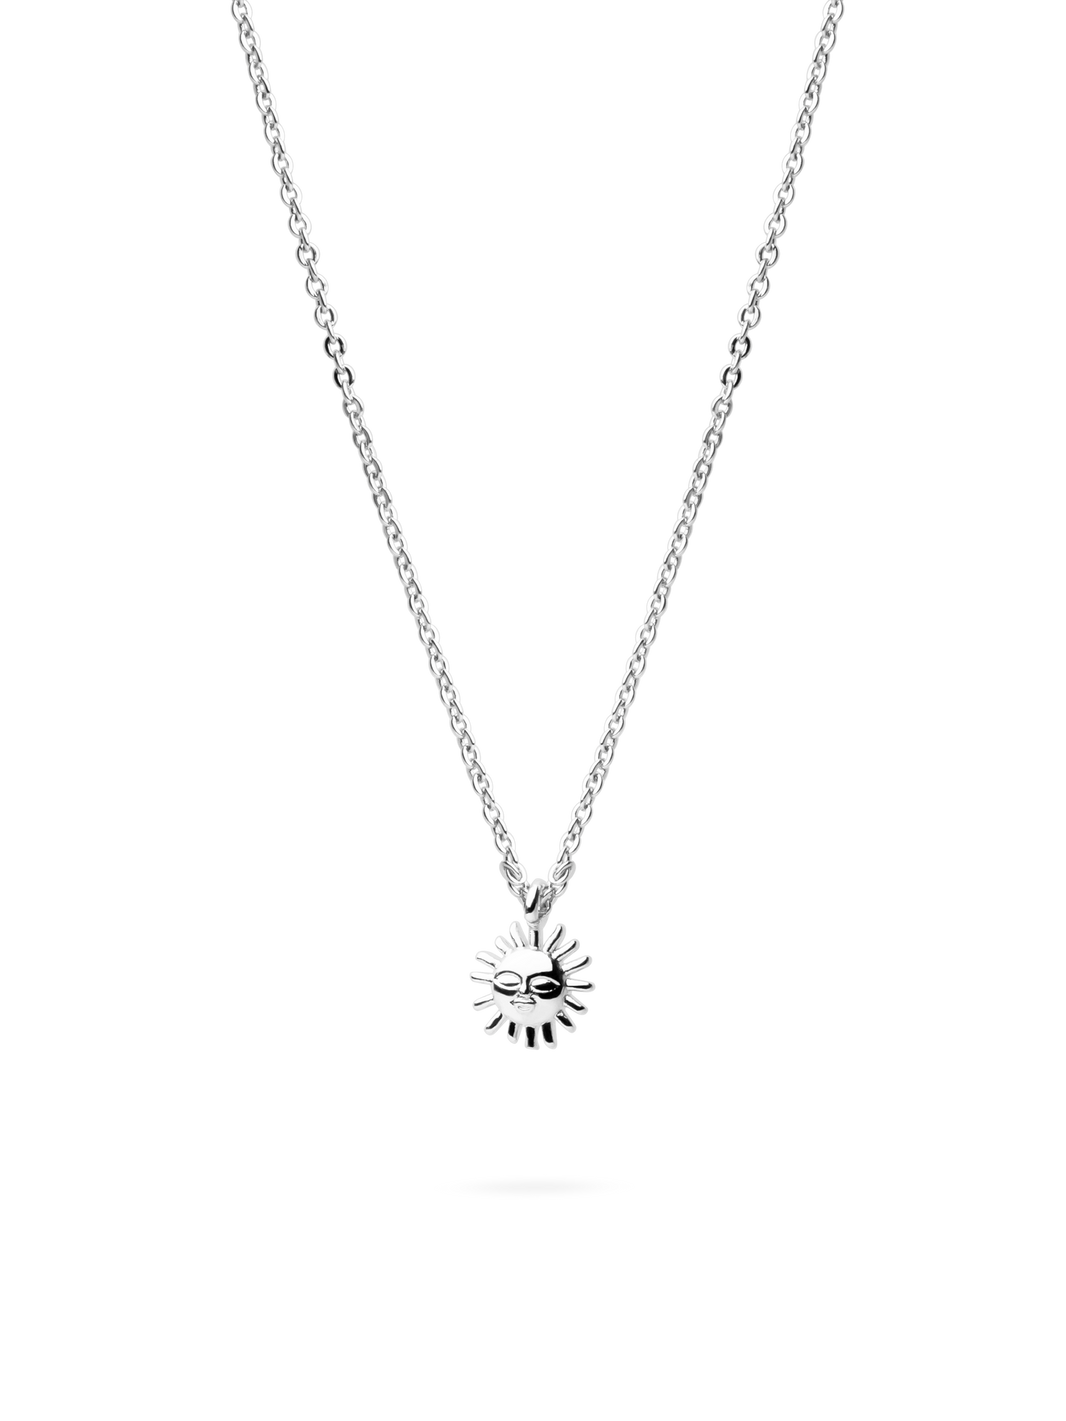 sun necklace 925 sterling silver plated brass 